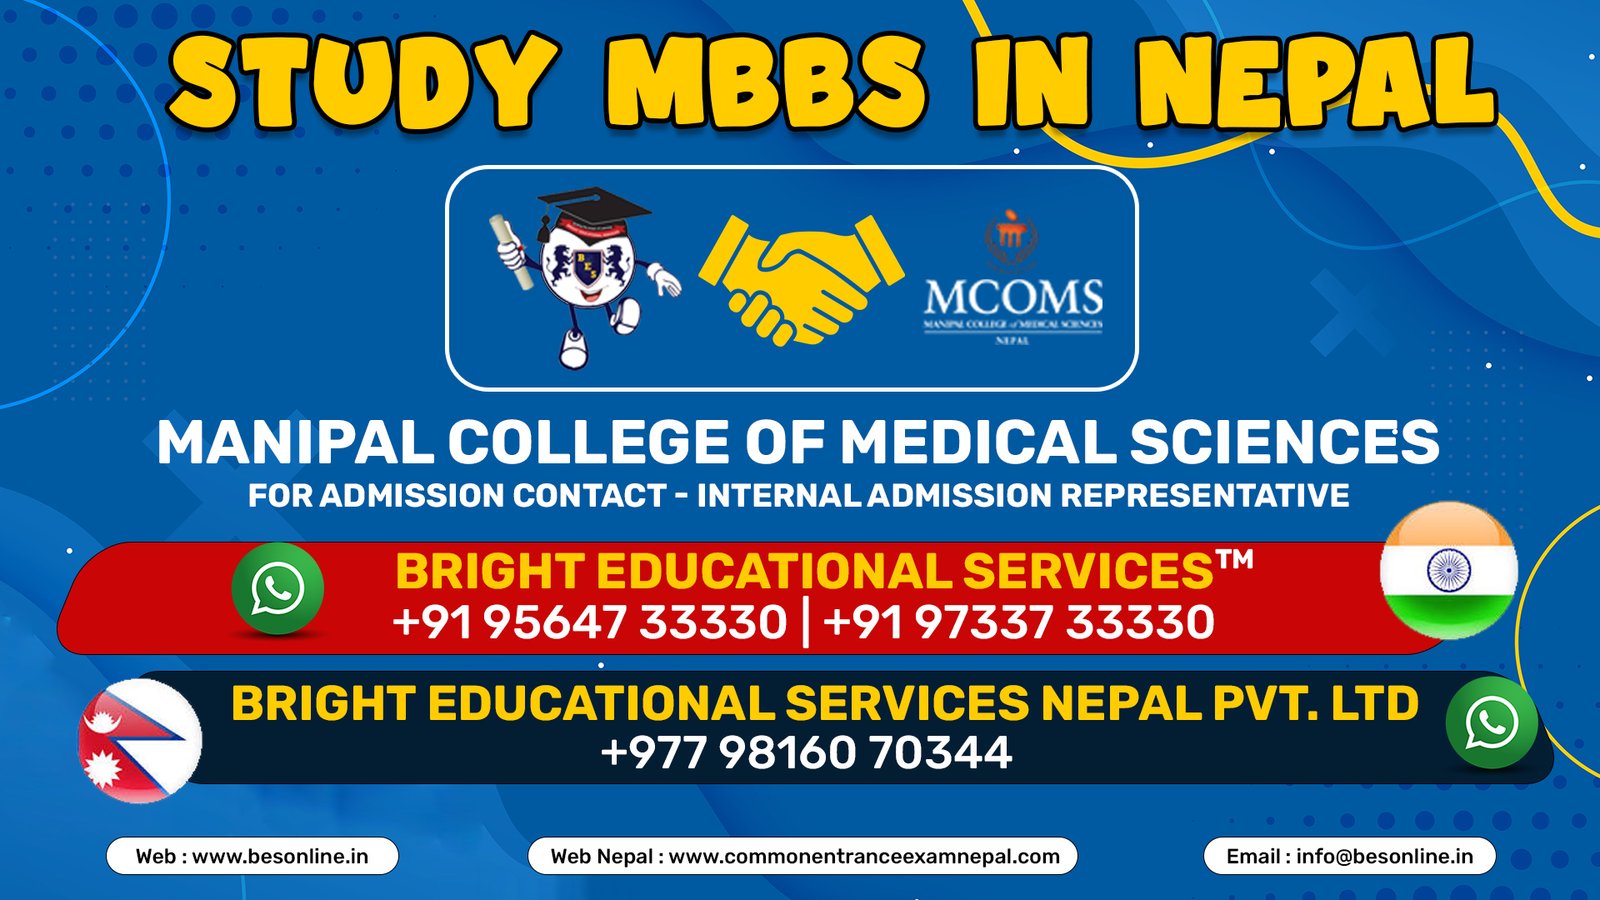 study-mbbs-in-nepal-at-manipal-college-of-medical-sciences-nepal-in-2023